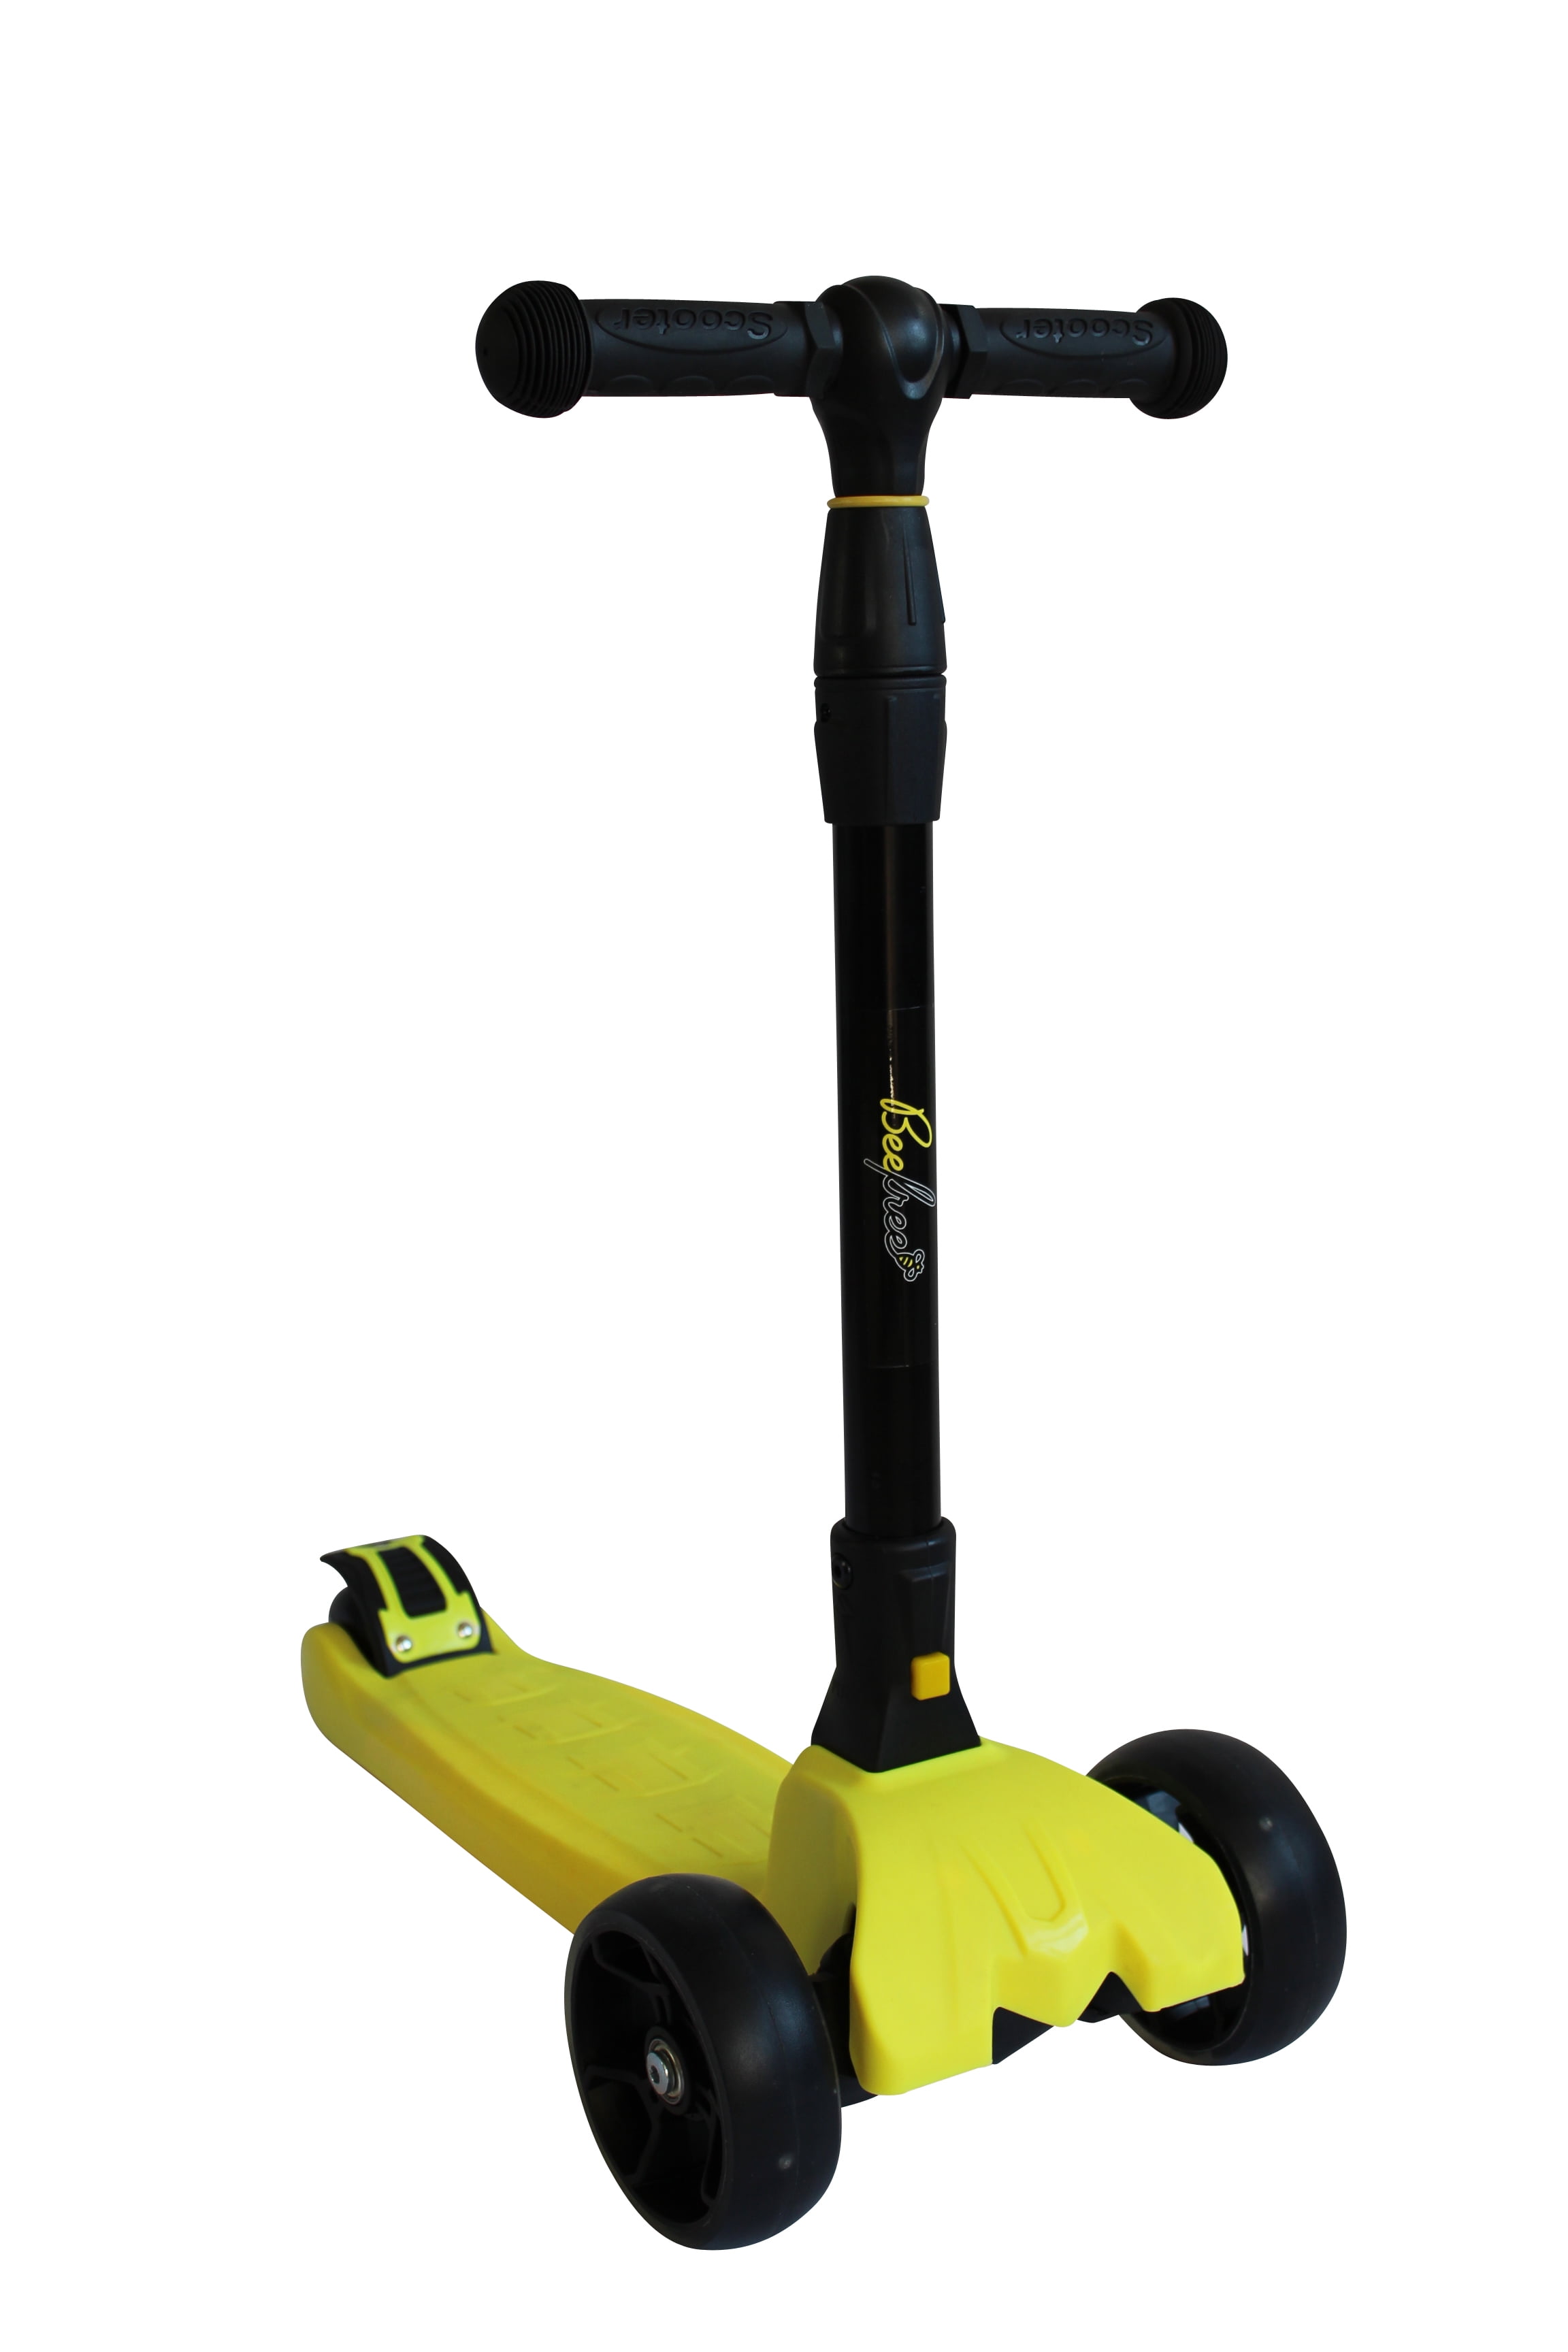 Bee Free XL Kick Scooter for Toddlers and Kids, 2-5 Years Old, Fold ...